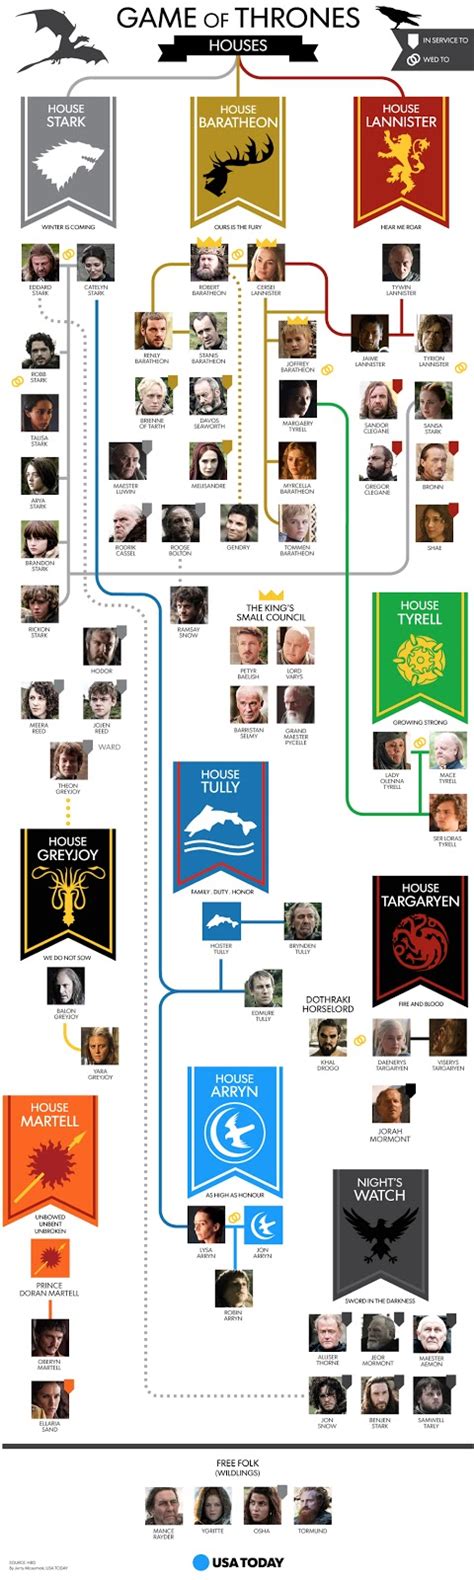 theKONGBLOG™: HBO's Game Of Thrones: Family Tree